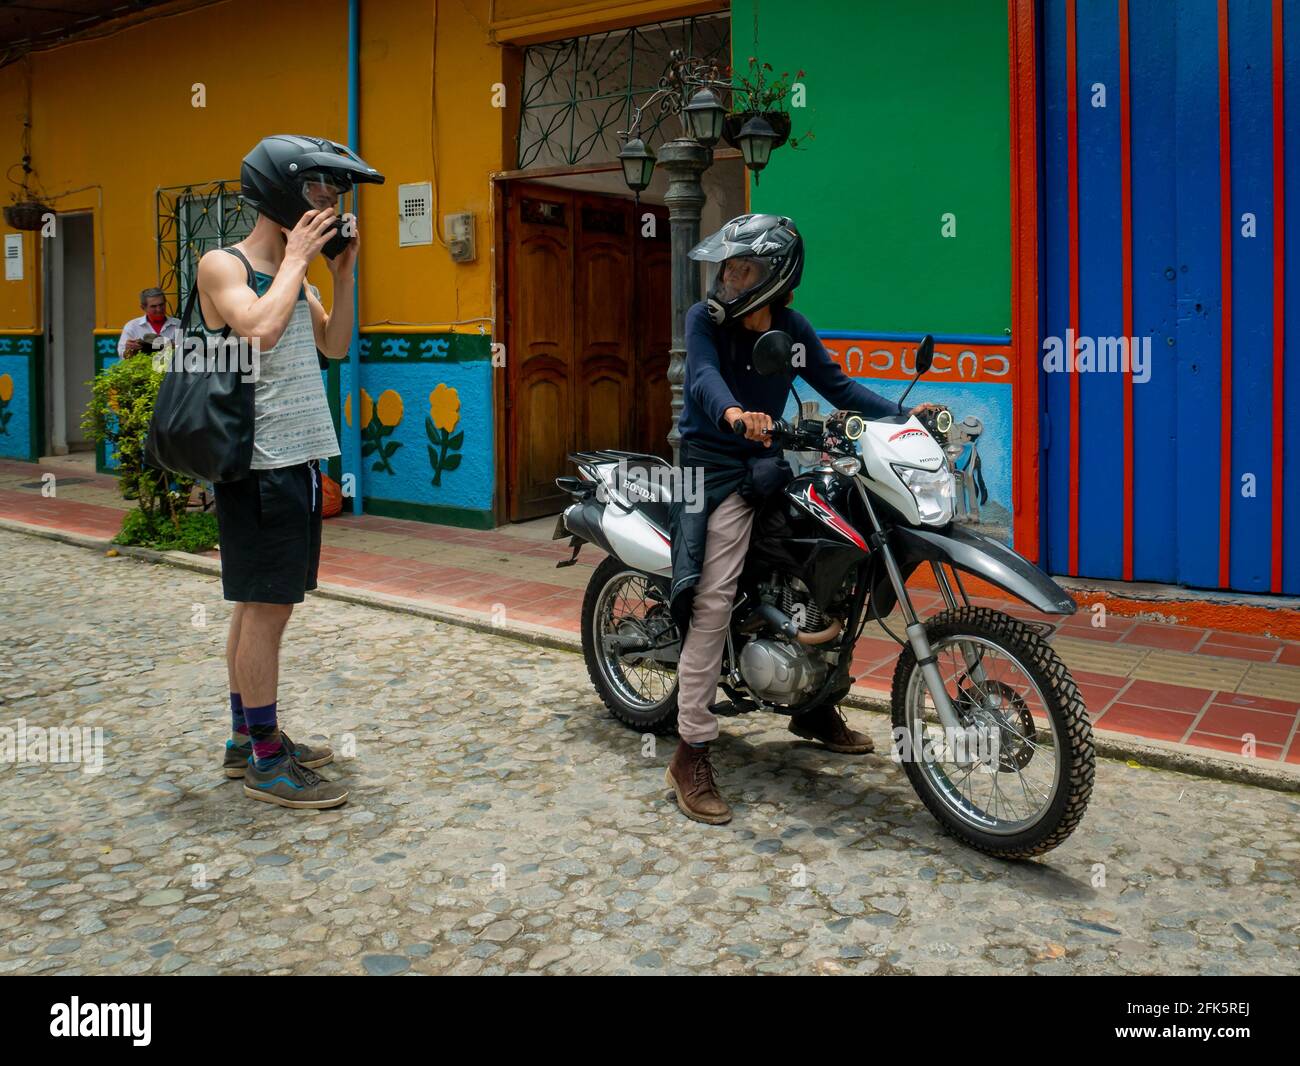 Guatapé, Antioquia, Colombia - April 4 2021: Woman Riding a Motorcycle and a Young White Man Getting on Behind Her Stock Photo